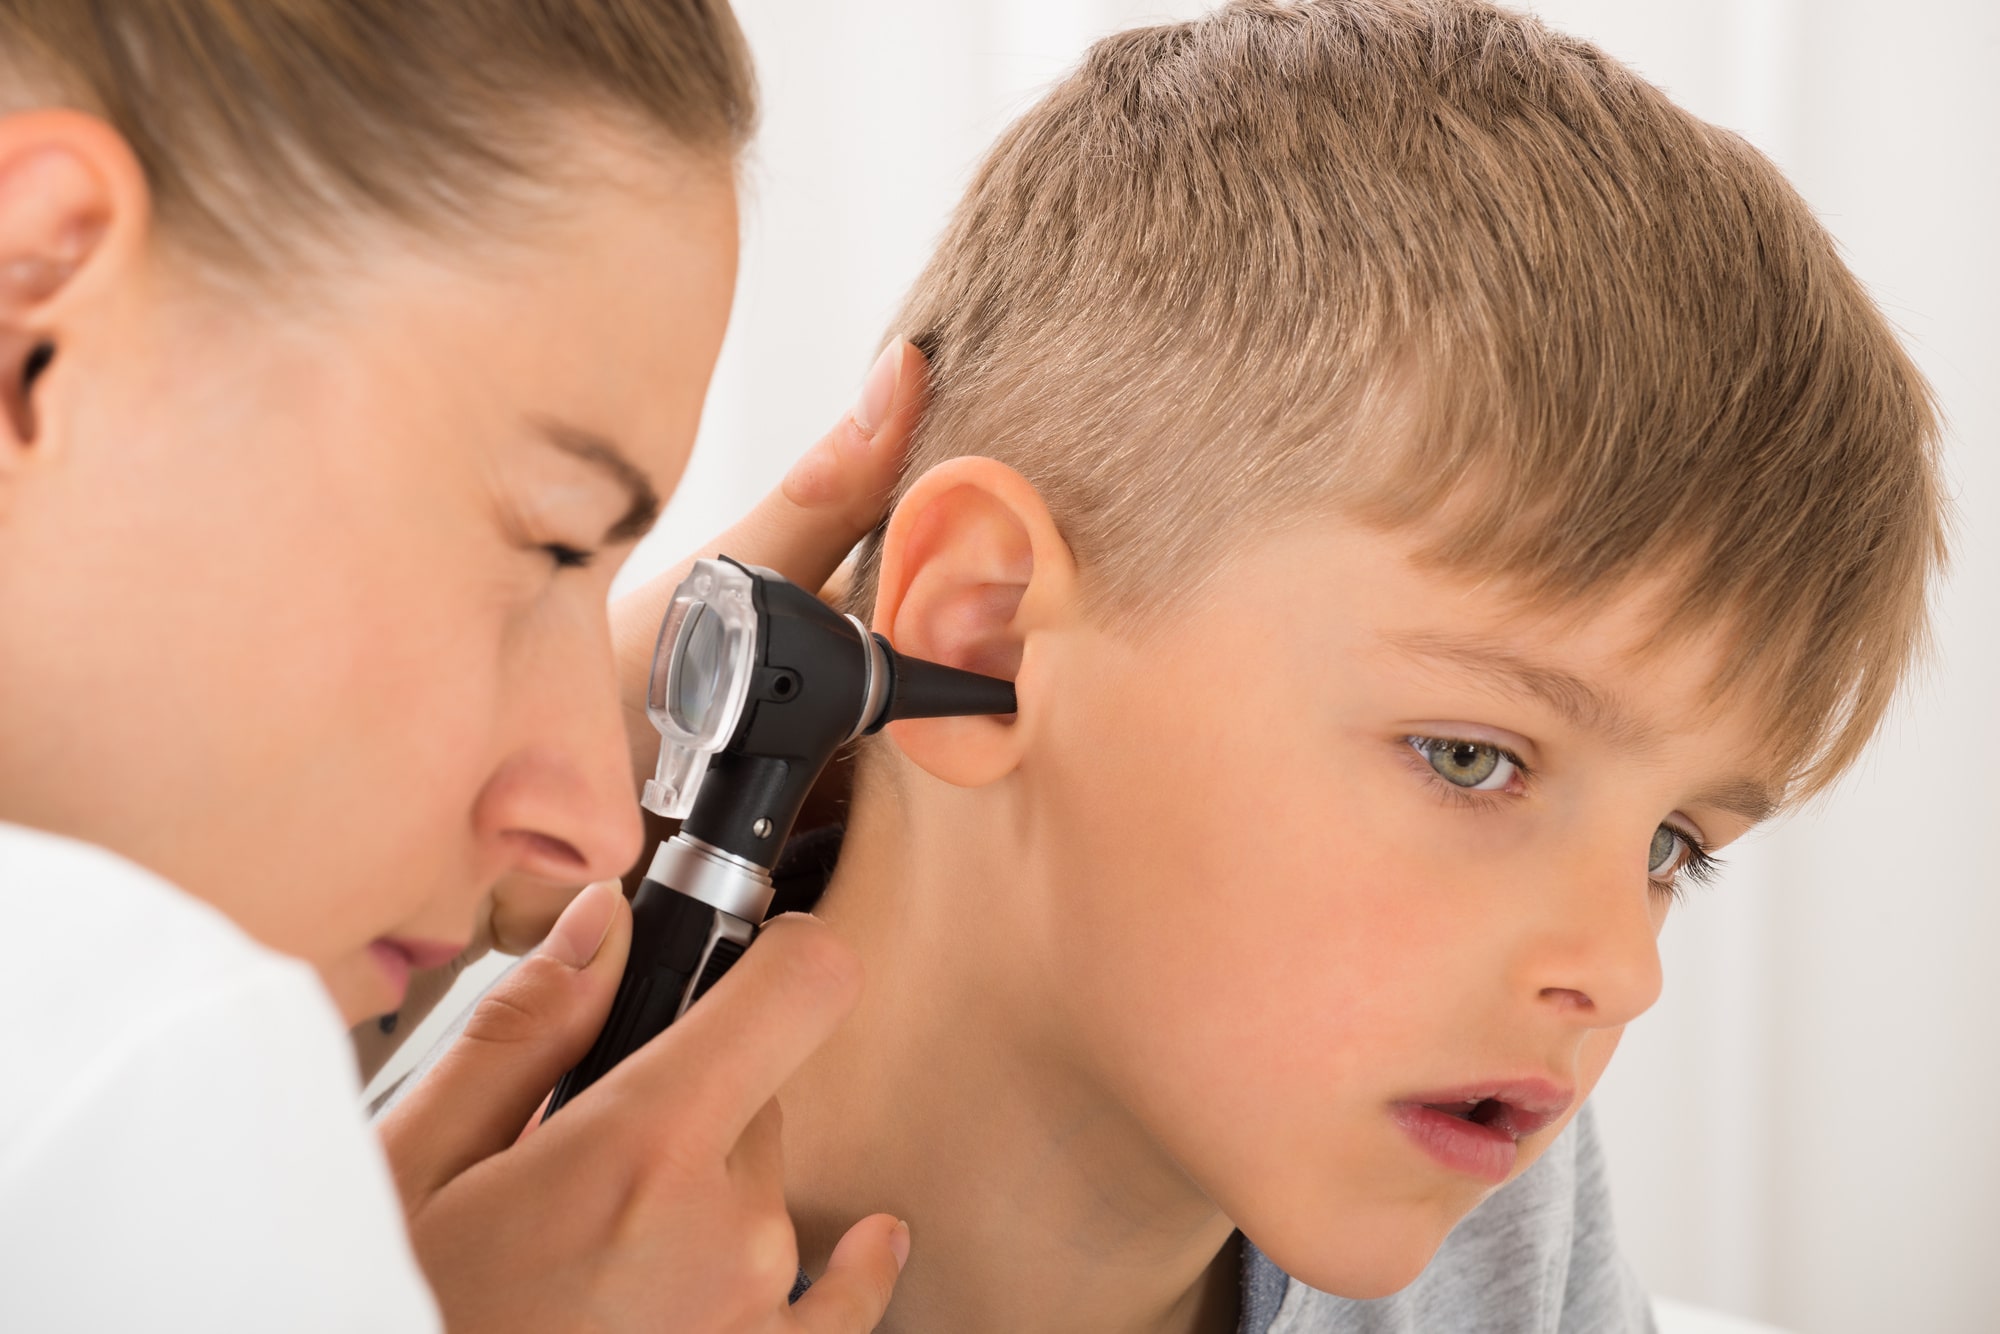 How to Fix Your Hearing Problems With SONOVIVE